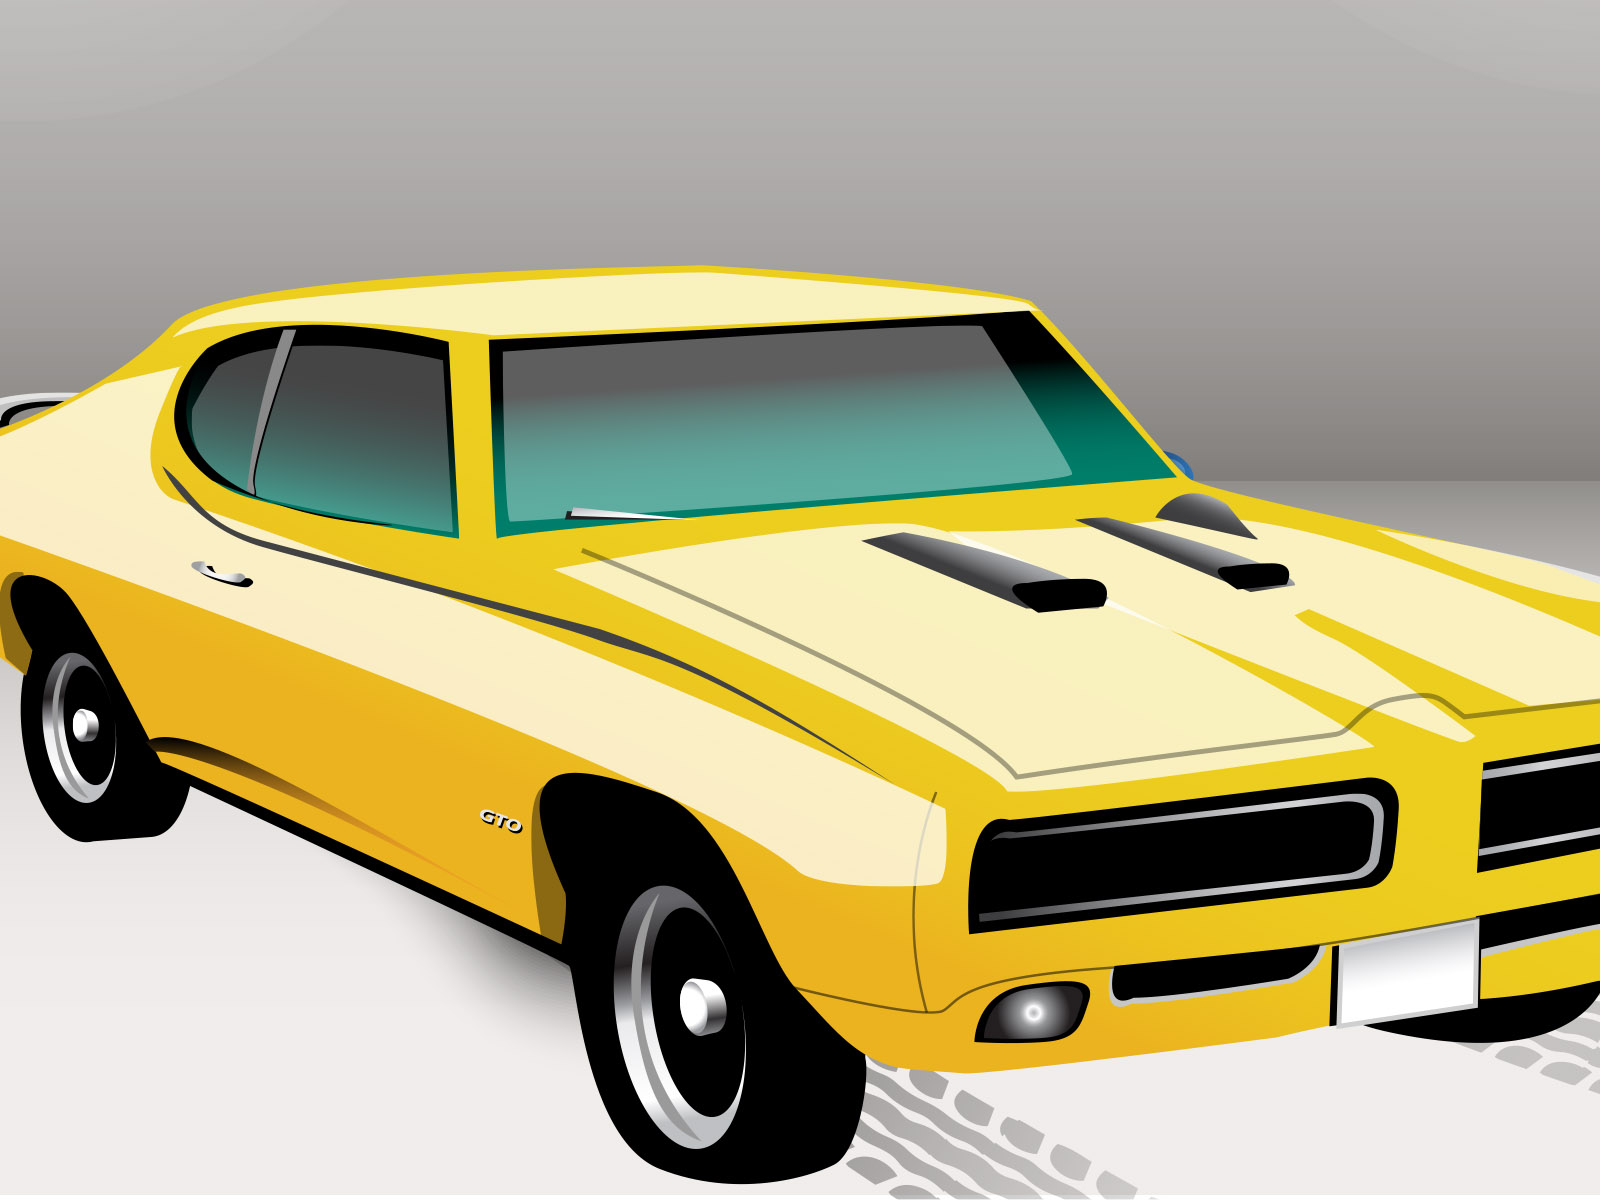 Mustang Car Illustration Powerpoint Templates - Car & Transportation,  Yellow - Free PPT Backgrounds and Templates